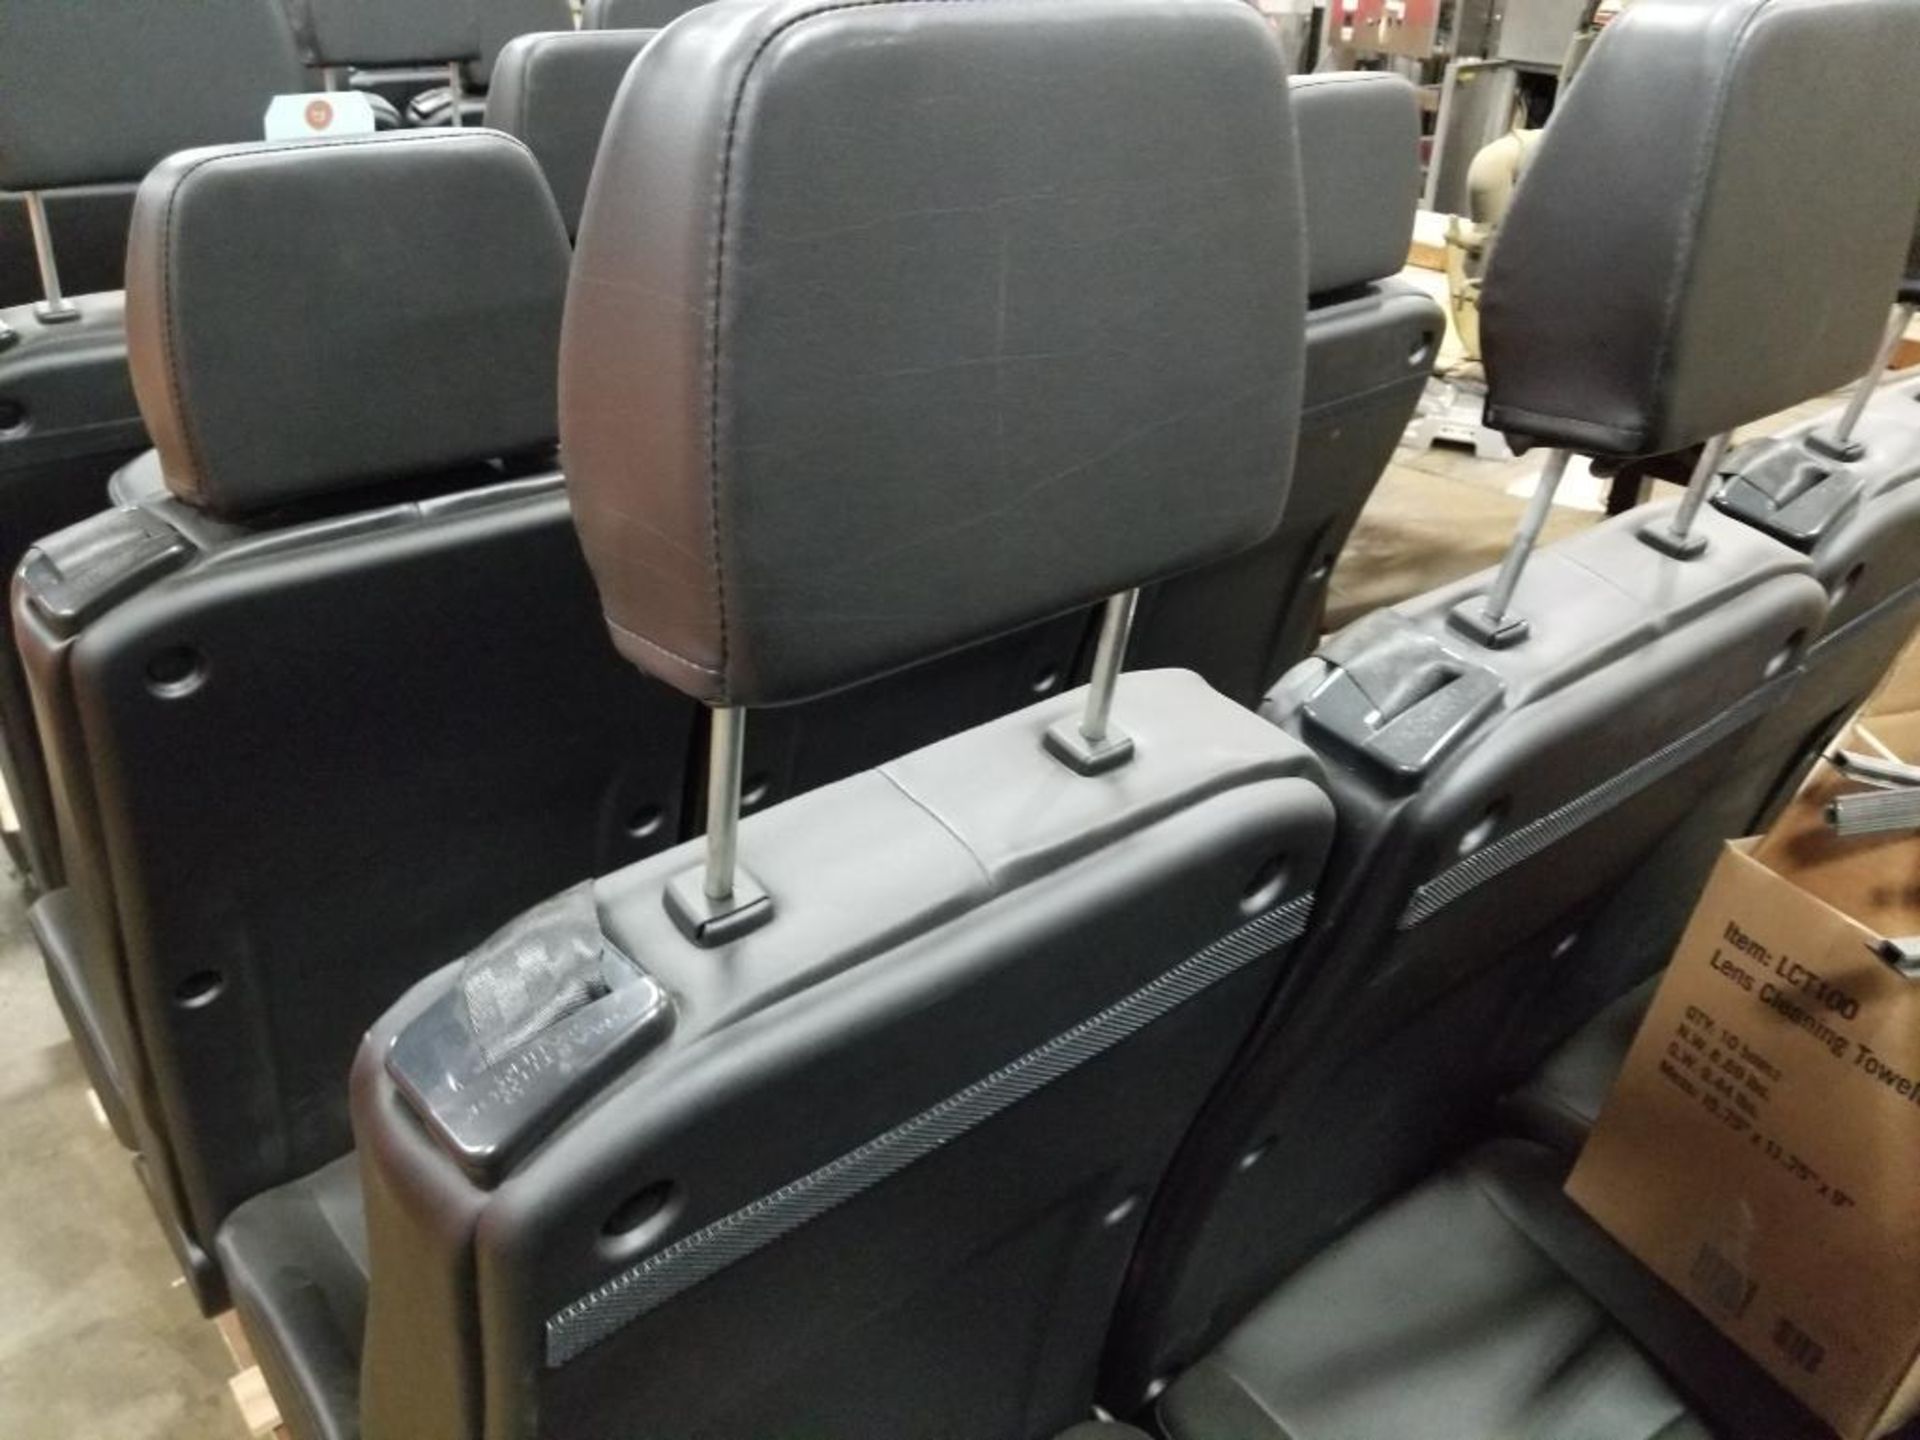 Qty 3 - Smart Floor Seating row seats. - Image 8 of 8